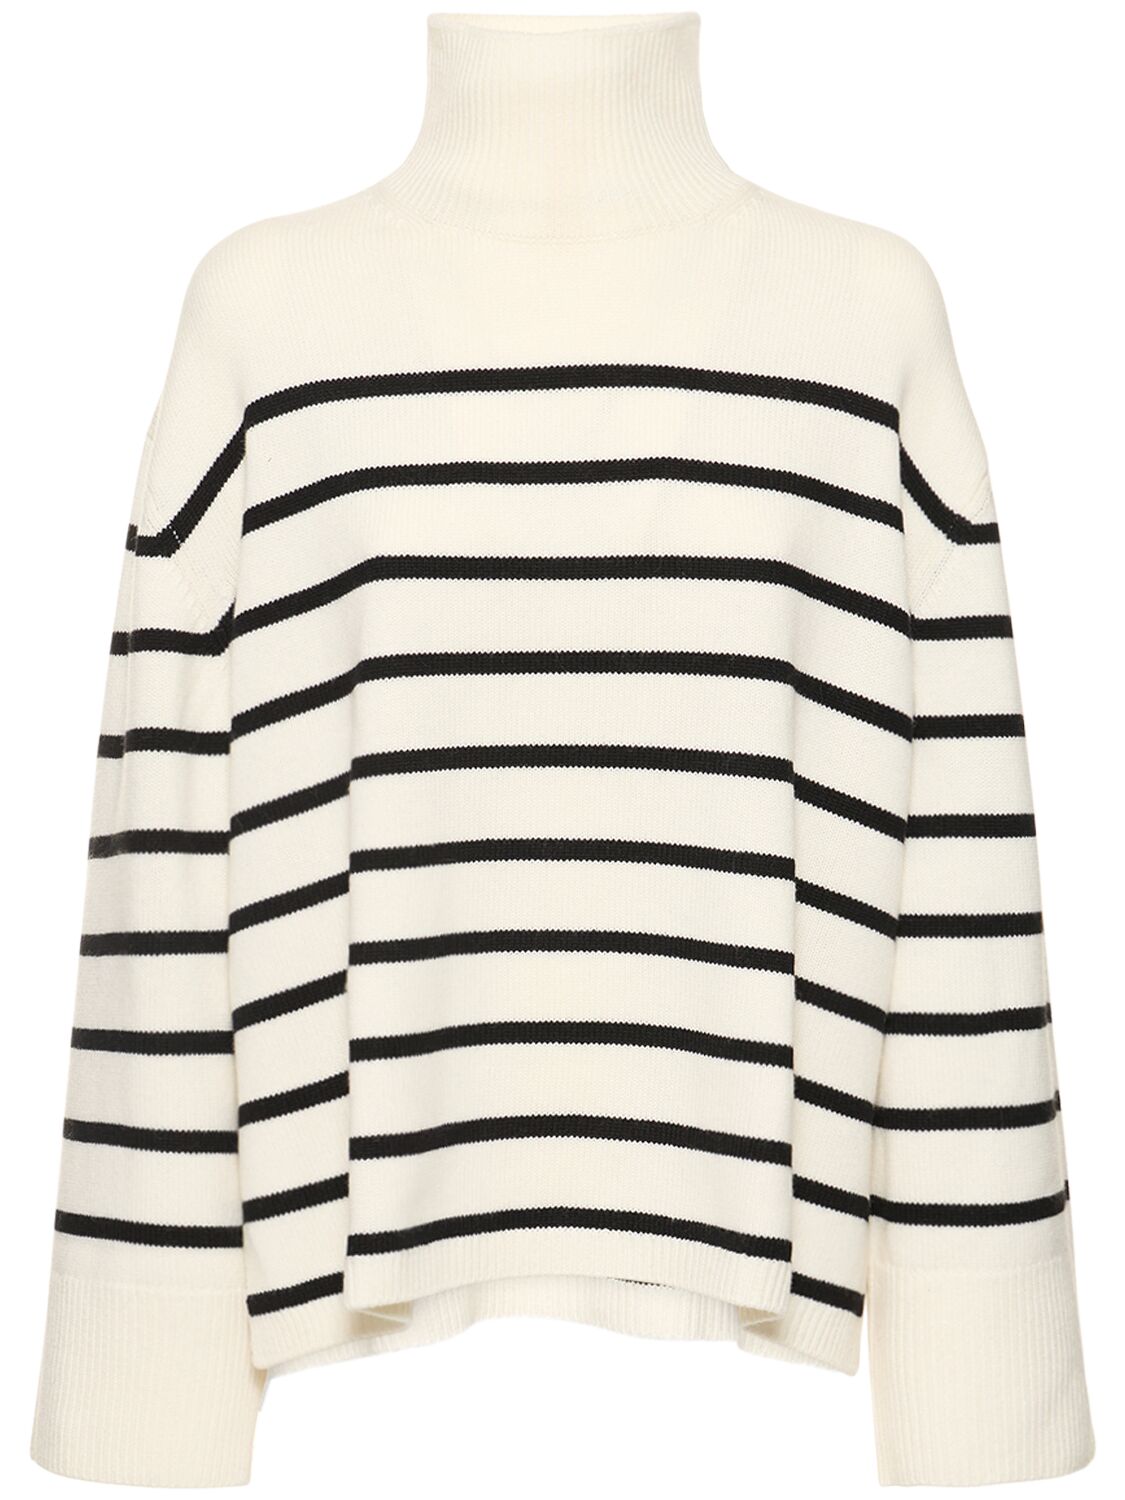 Image of Courtney Striped Wool Cashmere Sweater